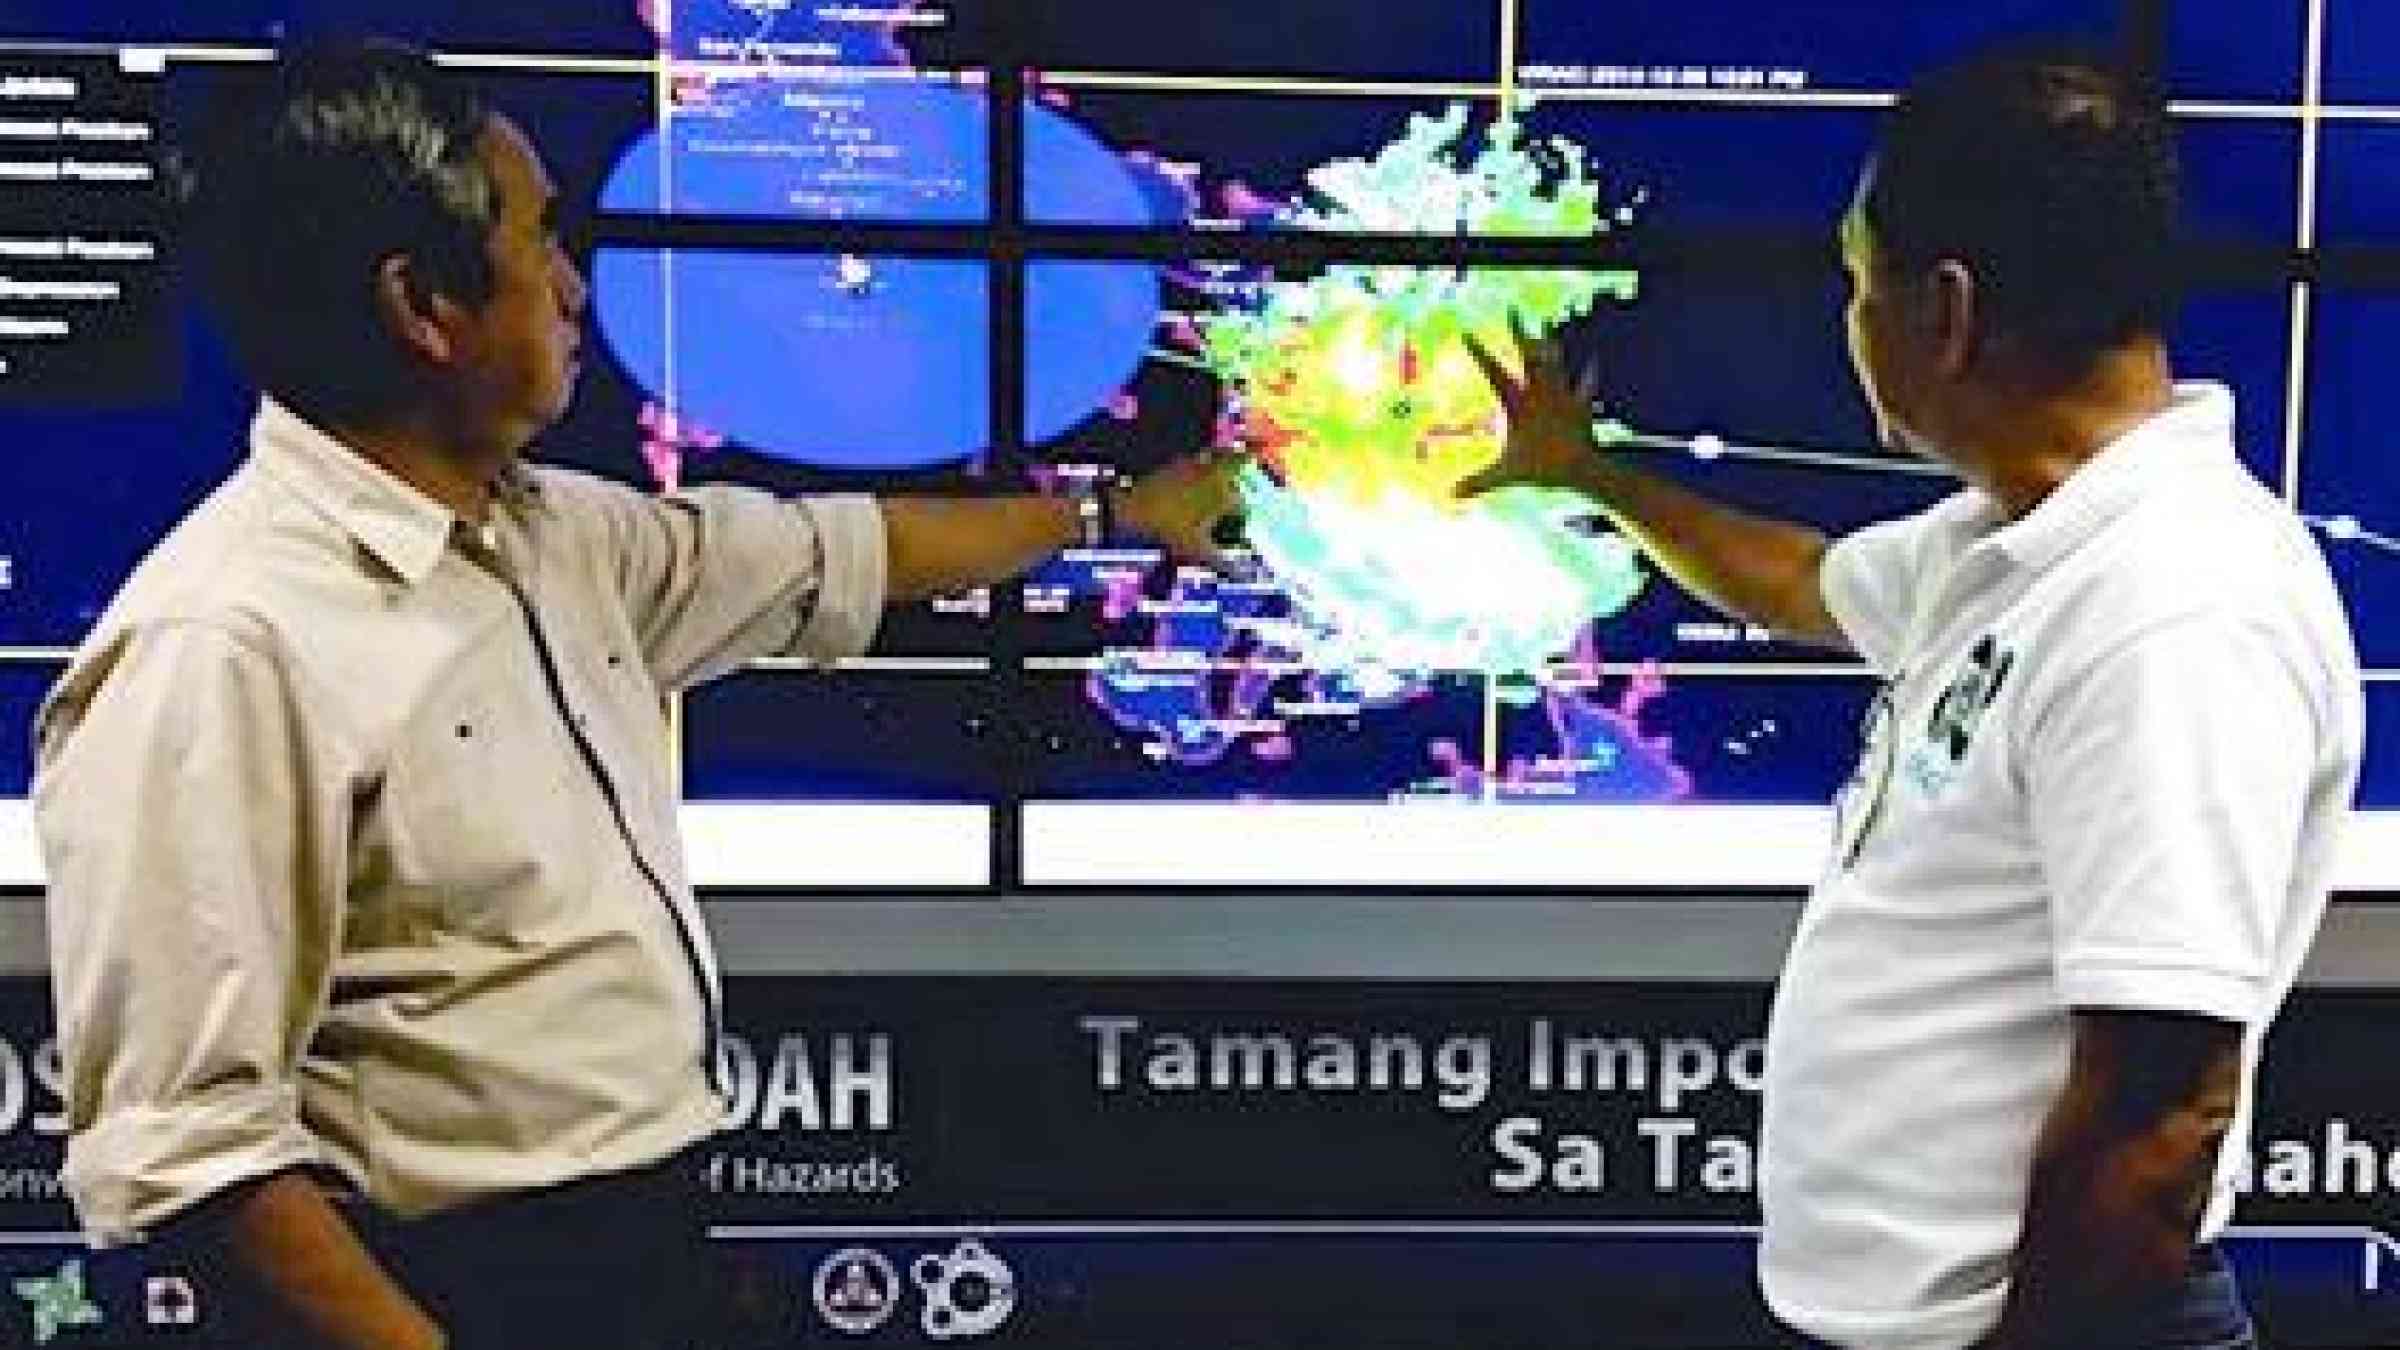 Alexander Pama (left), Executive Director of the Philippines' National Disaster Risk Reduction and Management Council, receiving a briefing from a local meteorologist on the expected movement of Typhoon Hagupit in December 2014. (Photo: Kenly Monteagudo)